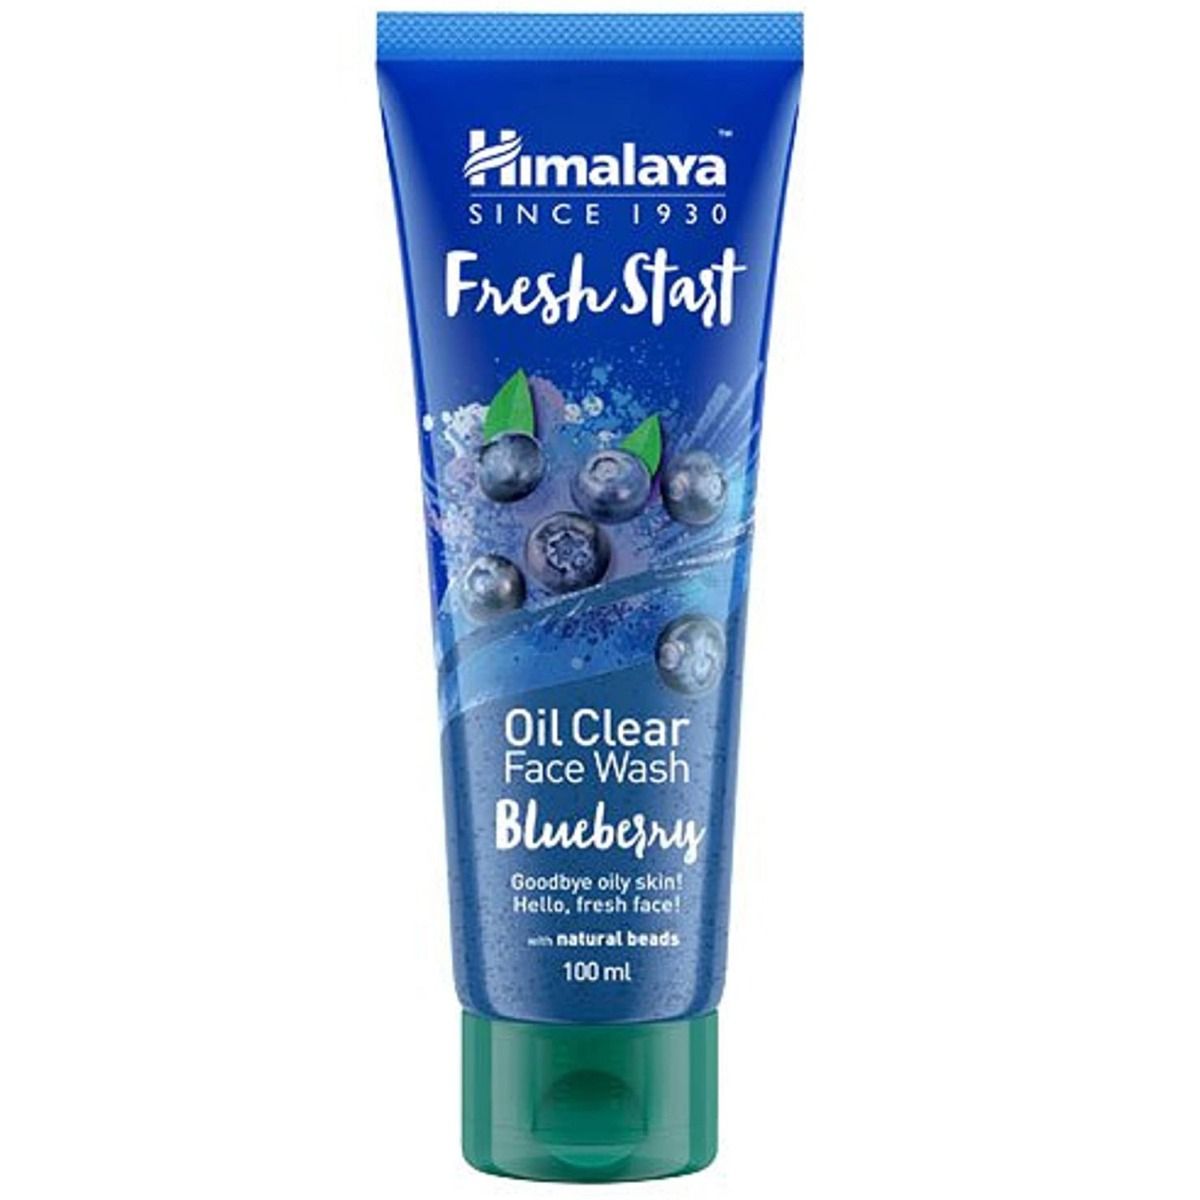 Himalaya Fresh Start Oil Clear Blueberry Face Wash, 100 ml, Pack of 1 